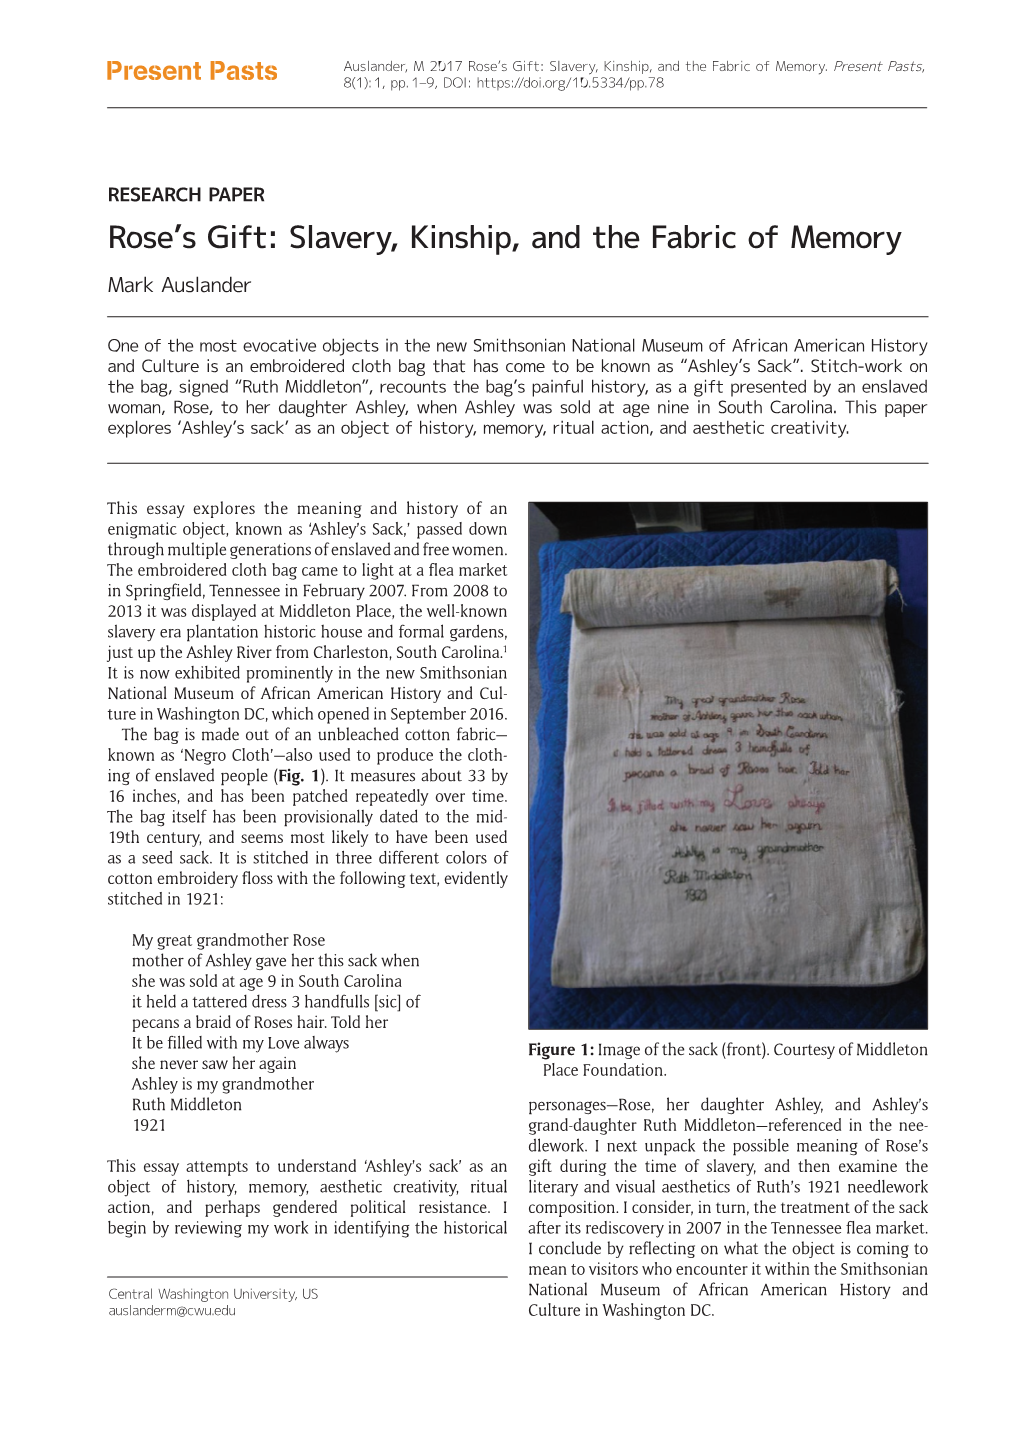 Rose's Gift: Slavery, Kinship, and the Fabric of Memory